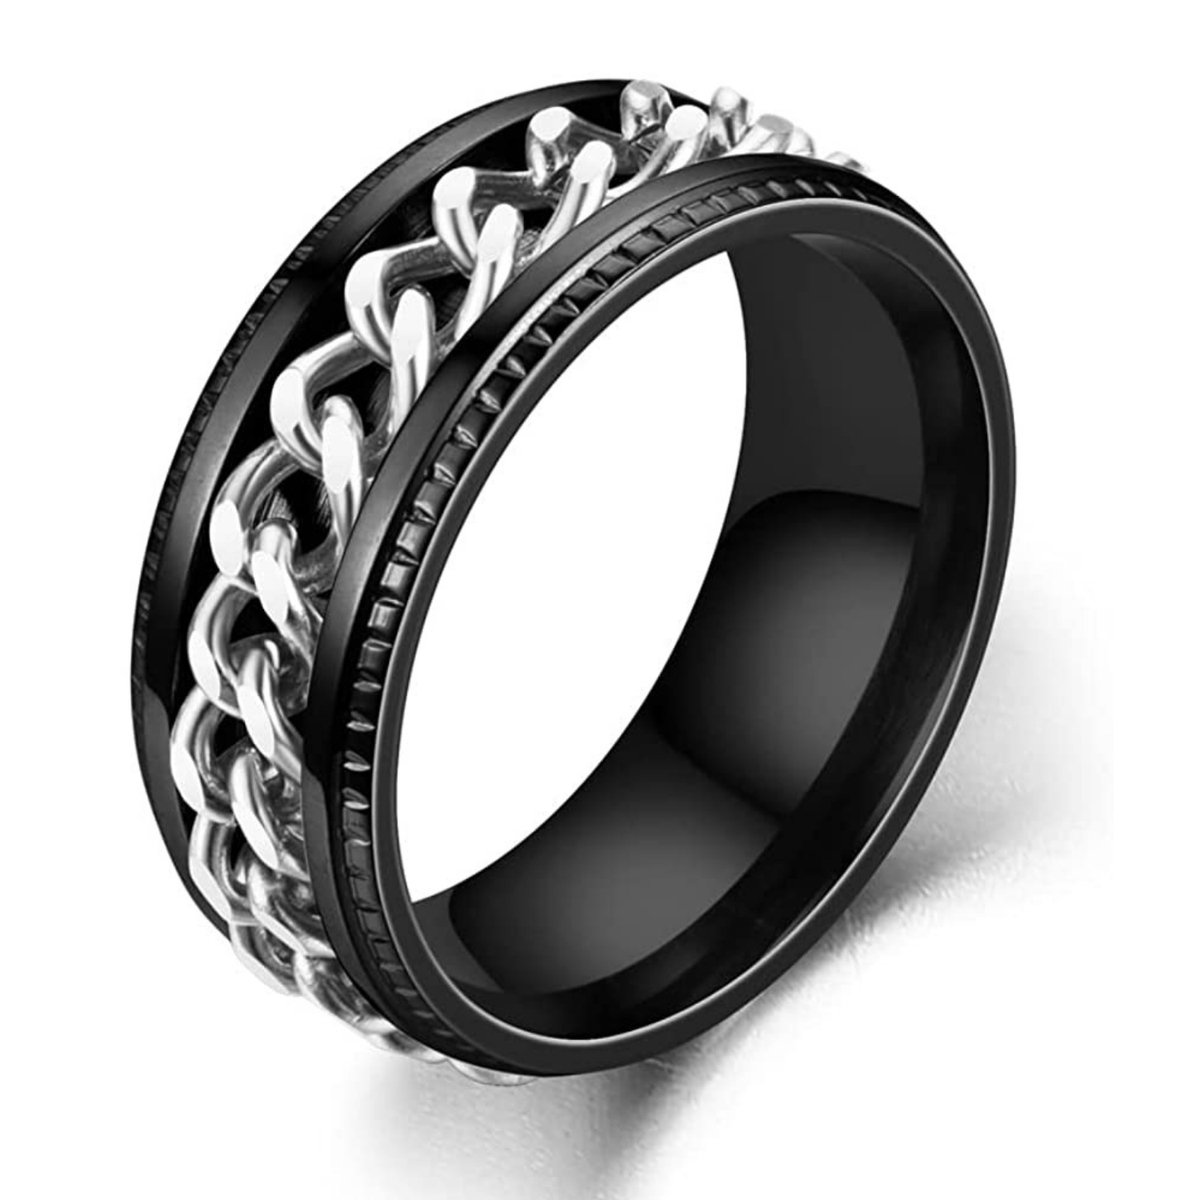 Anxiety Ring - (Ketting) - Stress Ring - Fidget Ring - Anxiety Ring For Finger - Draaibare Ring - Spinning Ring - Zwart-Zilver- (19.75mm / maat 62)